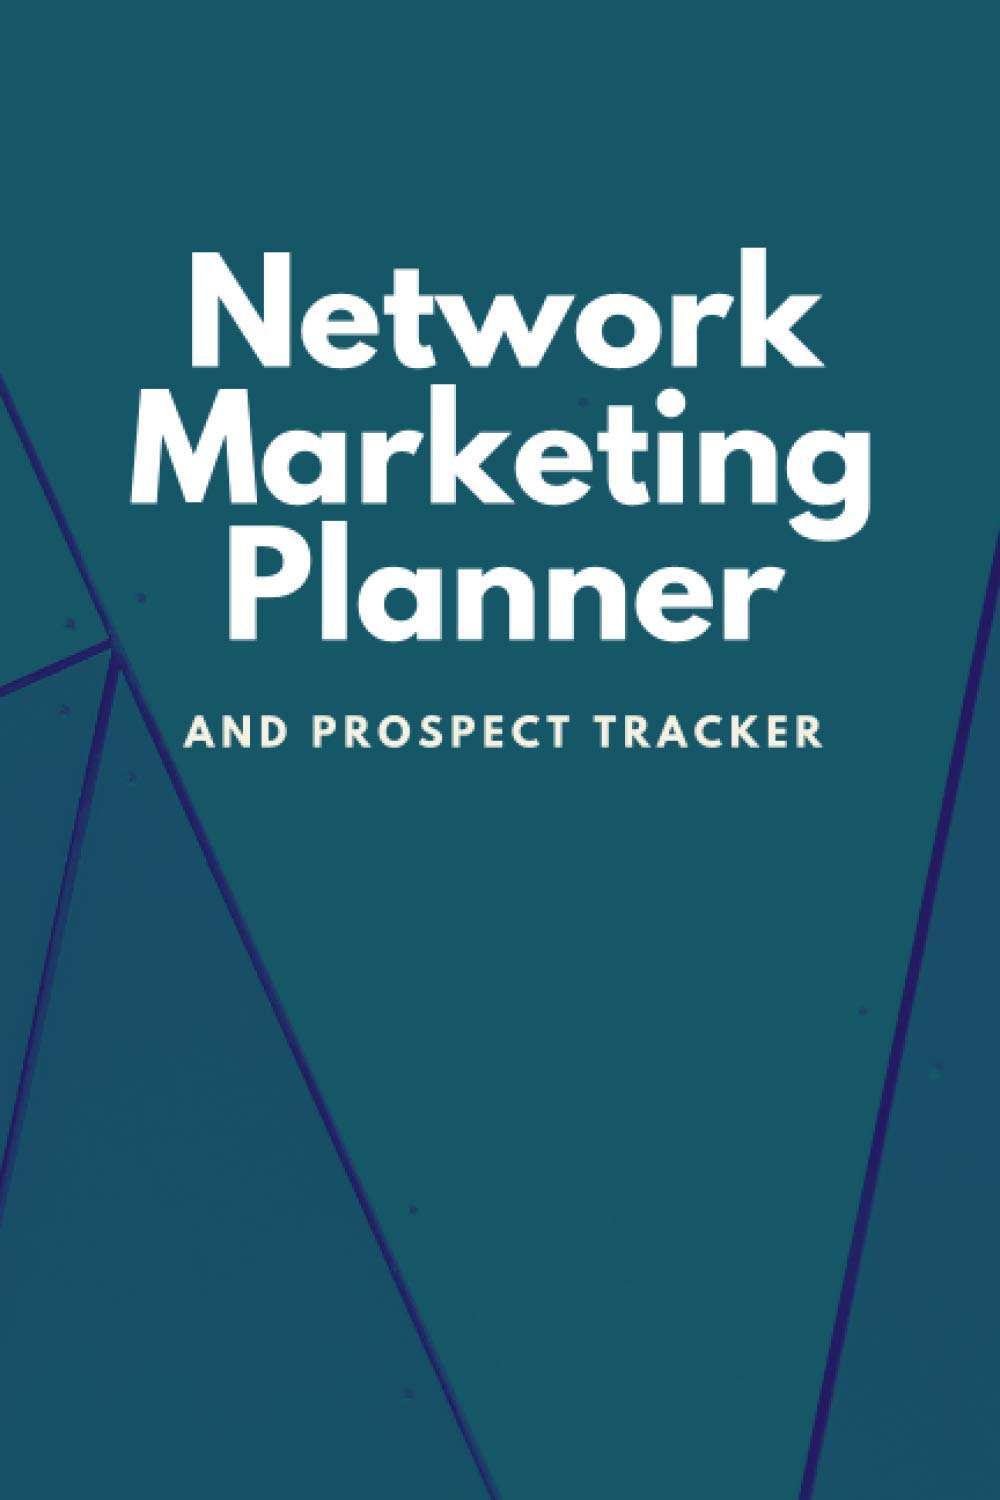 Network Marketing Planner And Prospect Tracker: Weekly Planner & Tracker For Prospects and Follow Ups For Home Business Owners, Direct Sellers and Mlm–teal (Simple Network Marketing Tools)